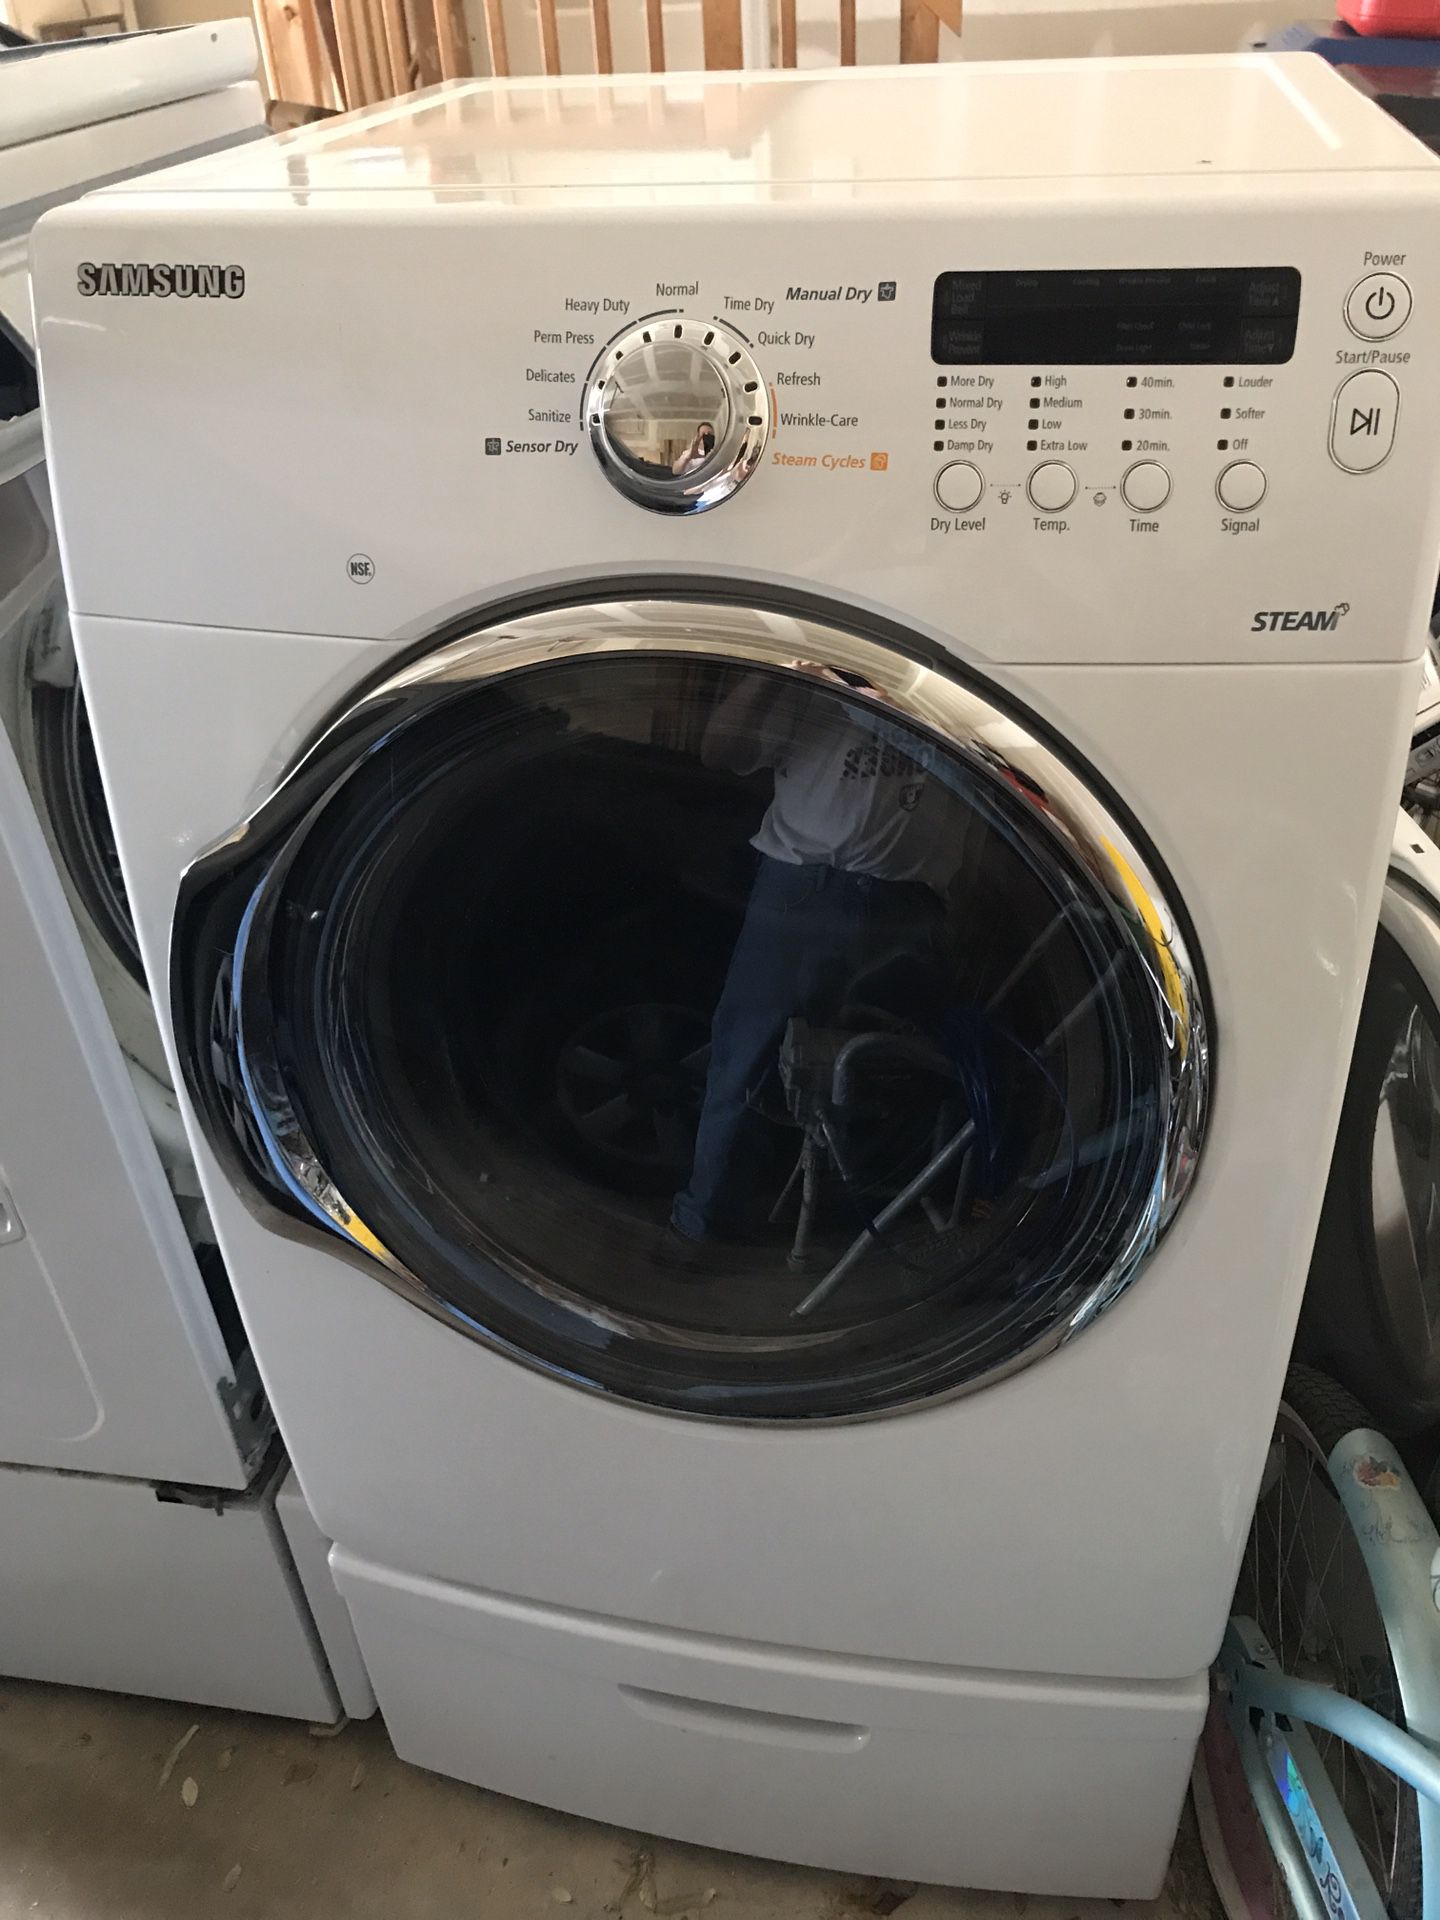 Samsung dryer - local pickup or delivery only